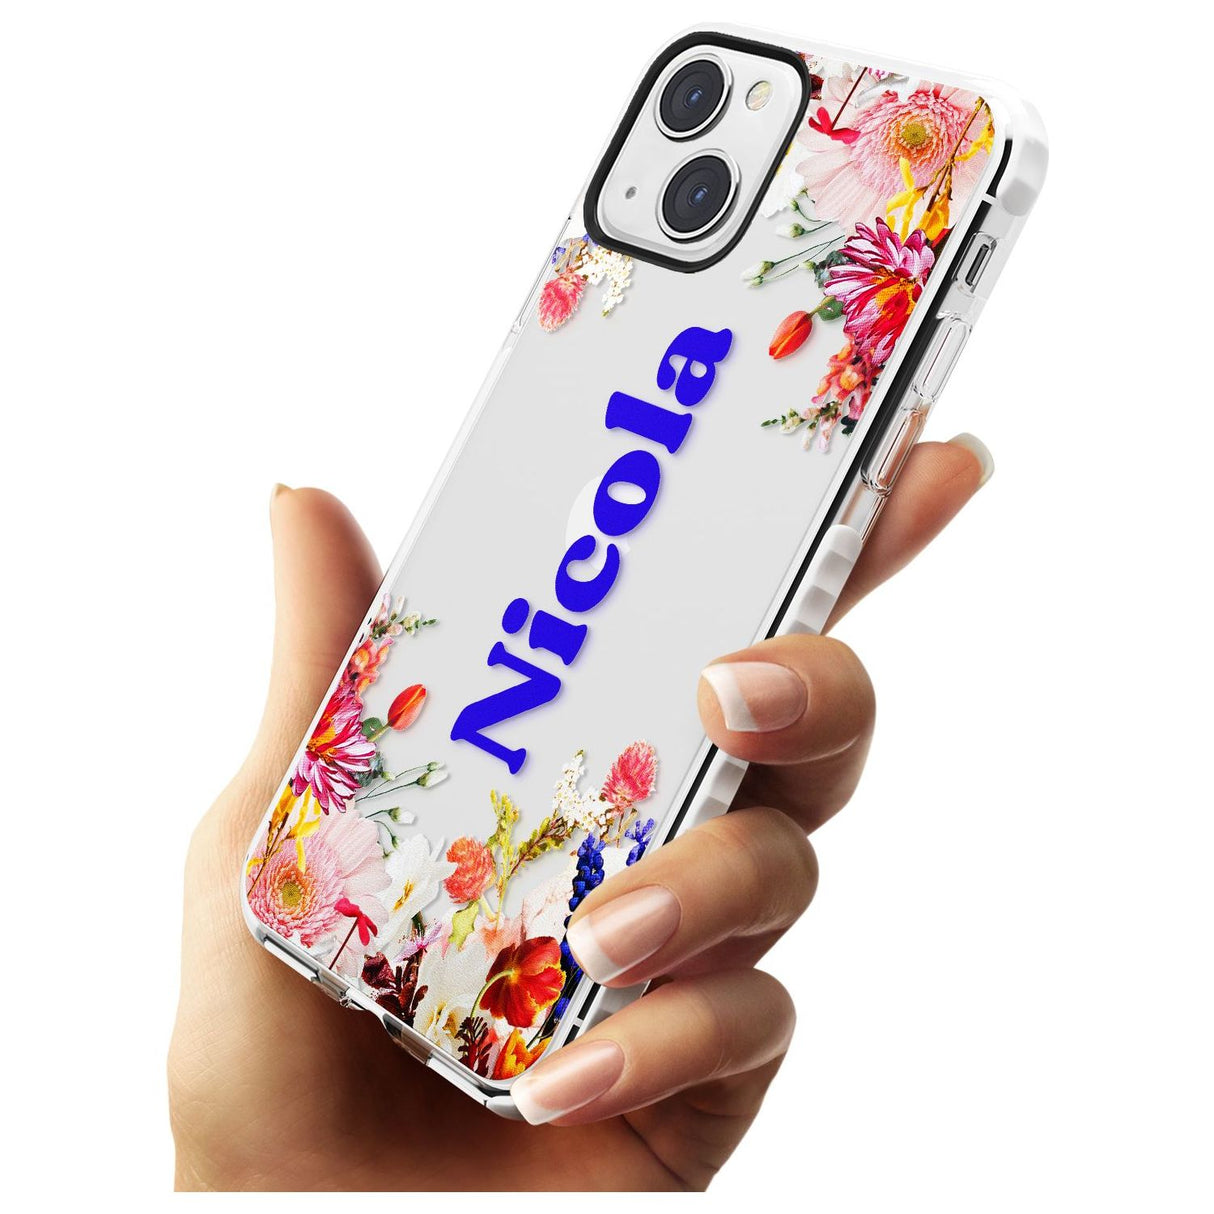 Personalised Text with Floral Borders Custom Phone Case iPhone 15 Pro Max / Black Impact Case,iPhone 15 Plus / Black Impact Case,iPhone 15 Pro / Black Impact Case,iPhone 15 / Black Impact Case,iPhone 15 Pro Max / Impact Case,iPhone 15 Plus / Impact Case,iPhone 15 Pro / Impact Case,iPhone 15 / Impact Case,iPhone 15 Pro Max / Magsafe Black Impact Case,iPhone 15 Plus / Magsafe Black Impact Case,iPhone 15 Pro / Magsafe Black Impact Case,iPhone 15 / Magsafe Black Impact Case,iPhone 14 Pro Max / Black Impact Case